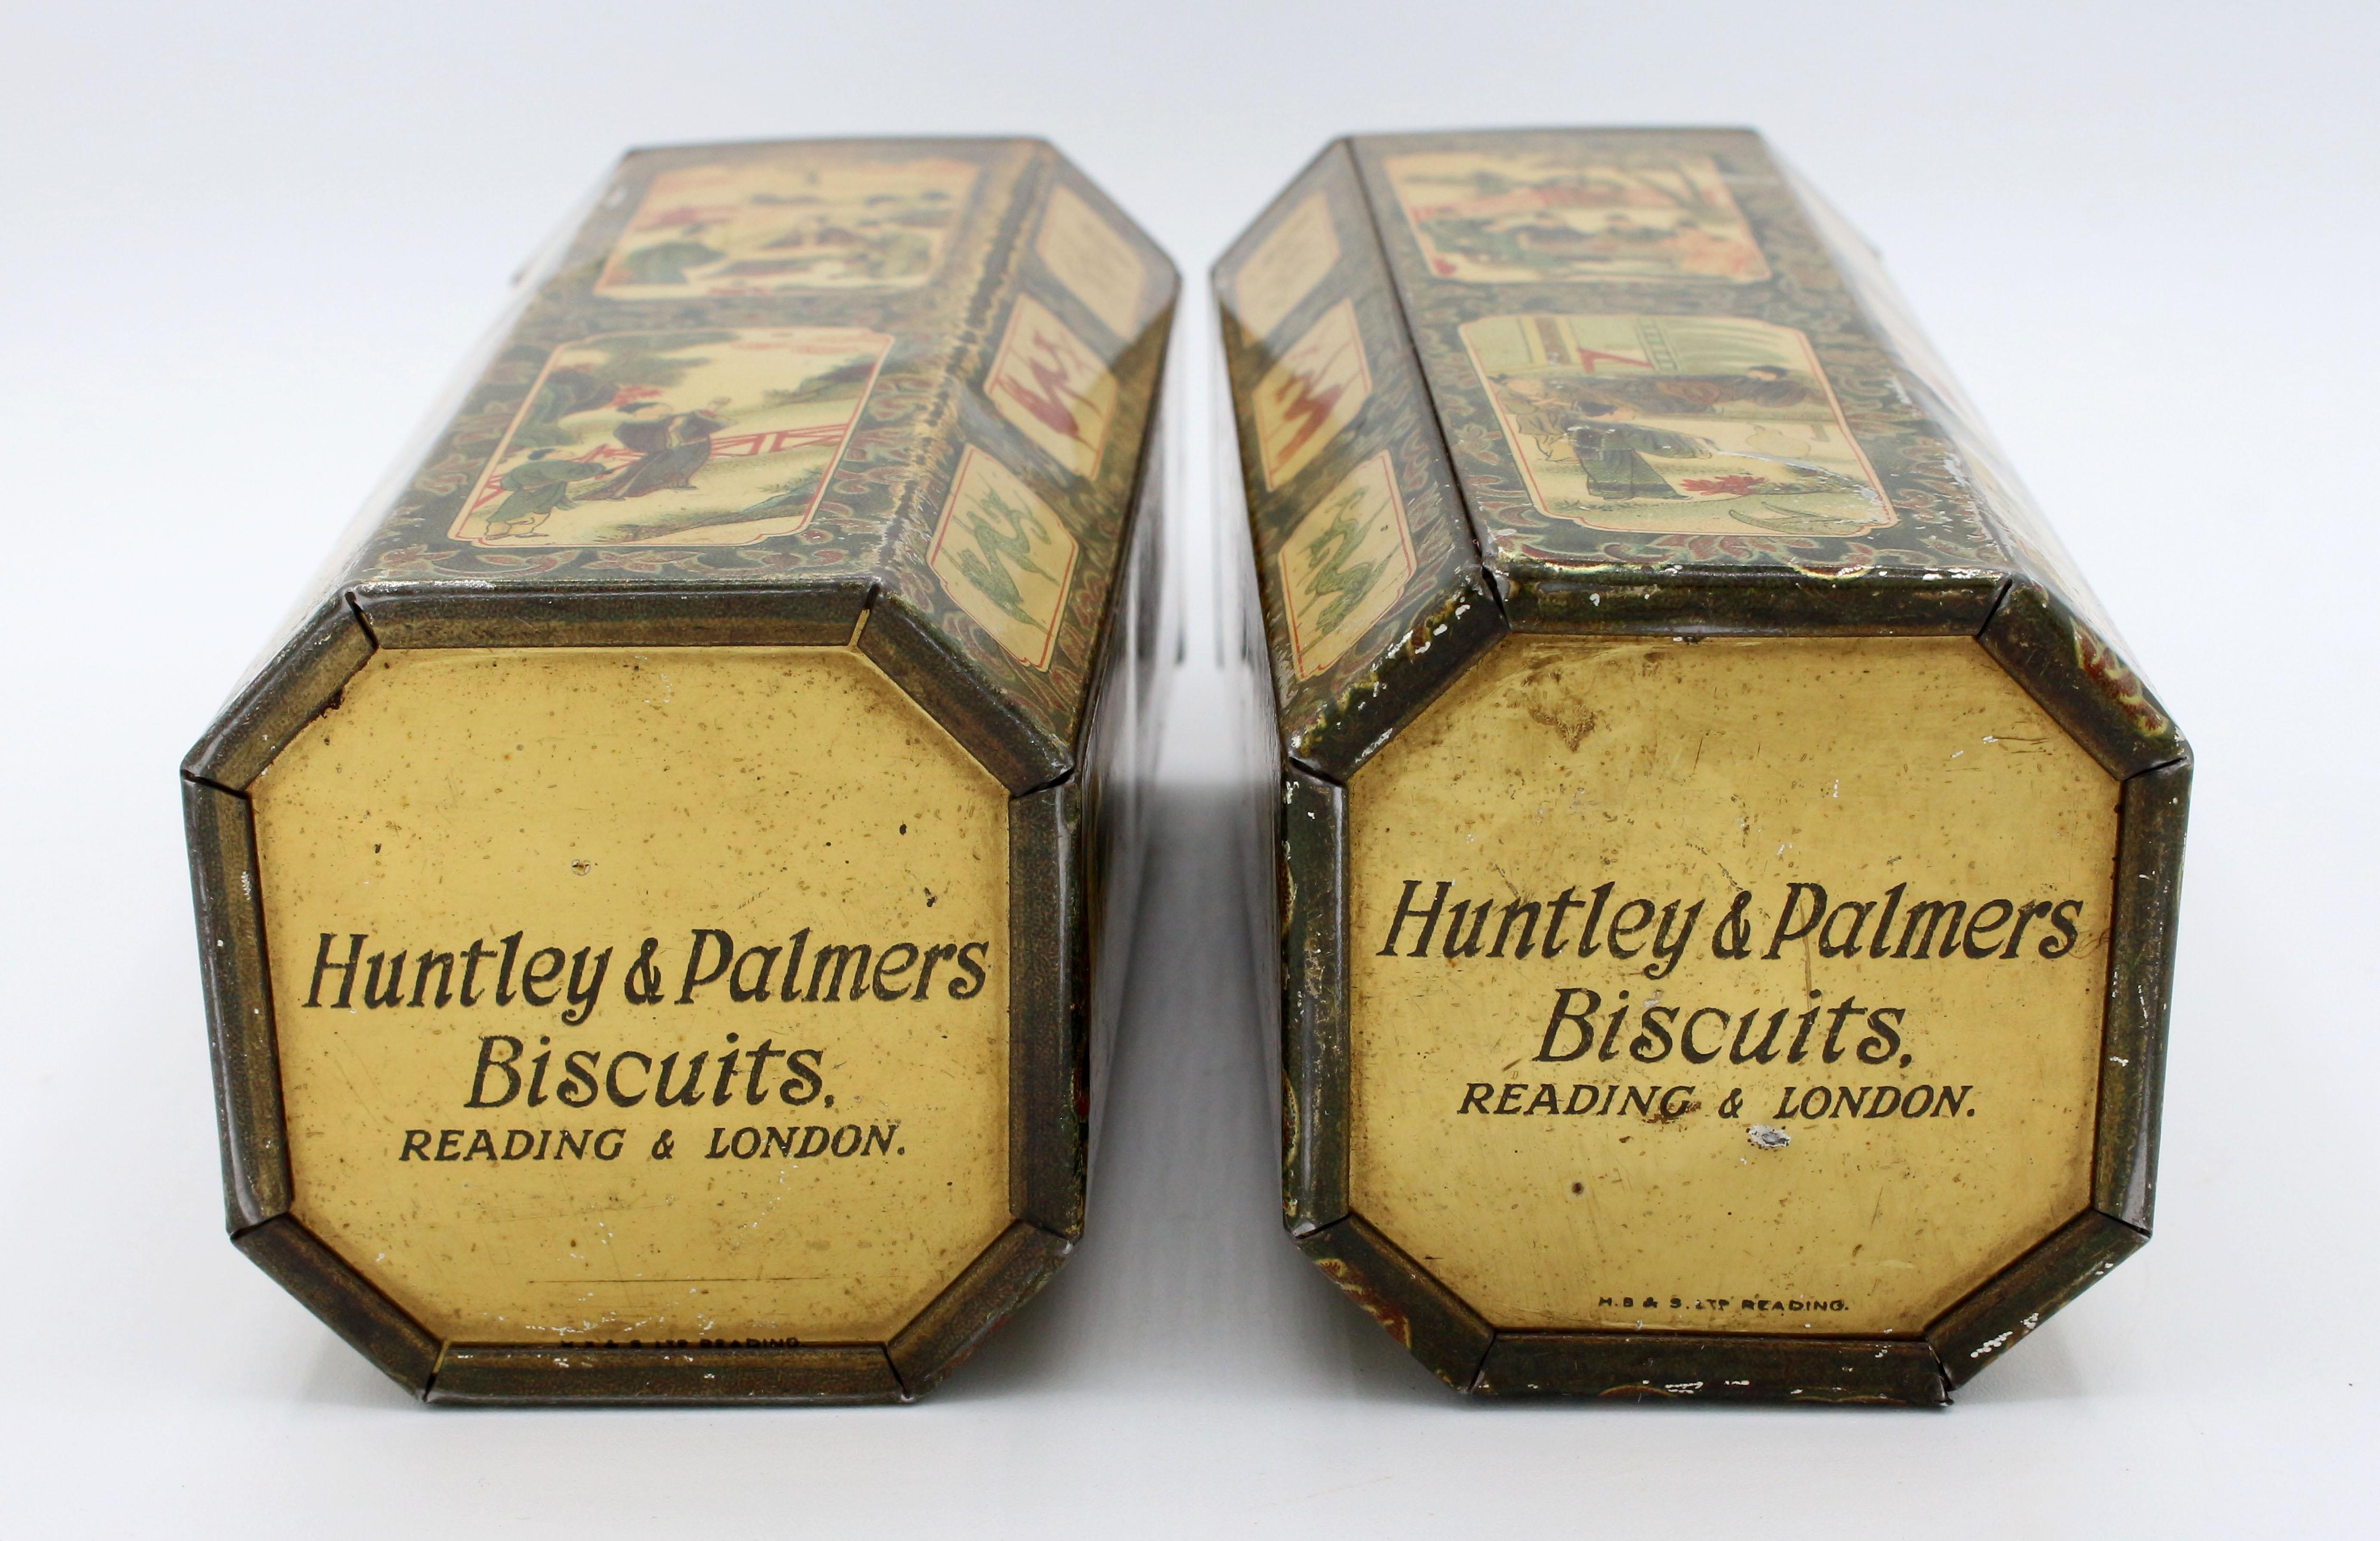 Pair of Vase Form Biscuit Tin Boxes by Huntley & Palmers, 1928, English For Sale 2